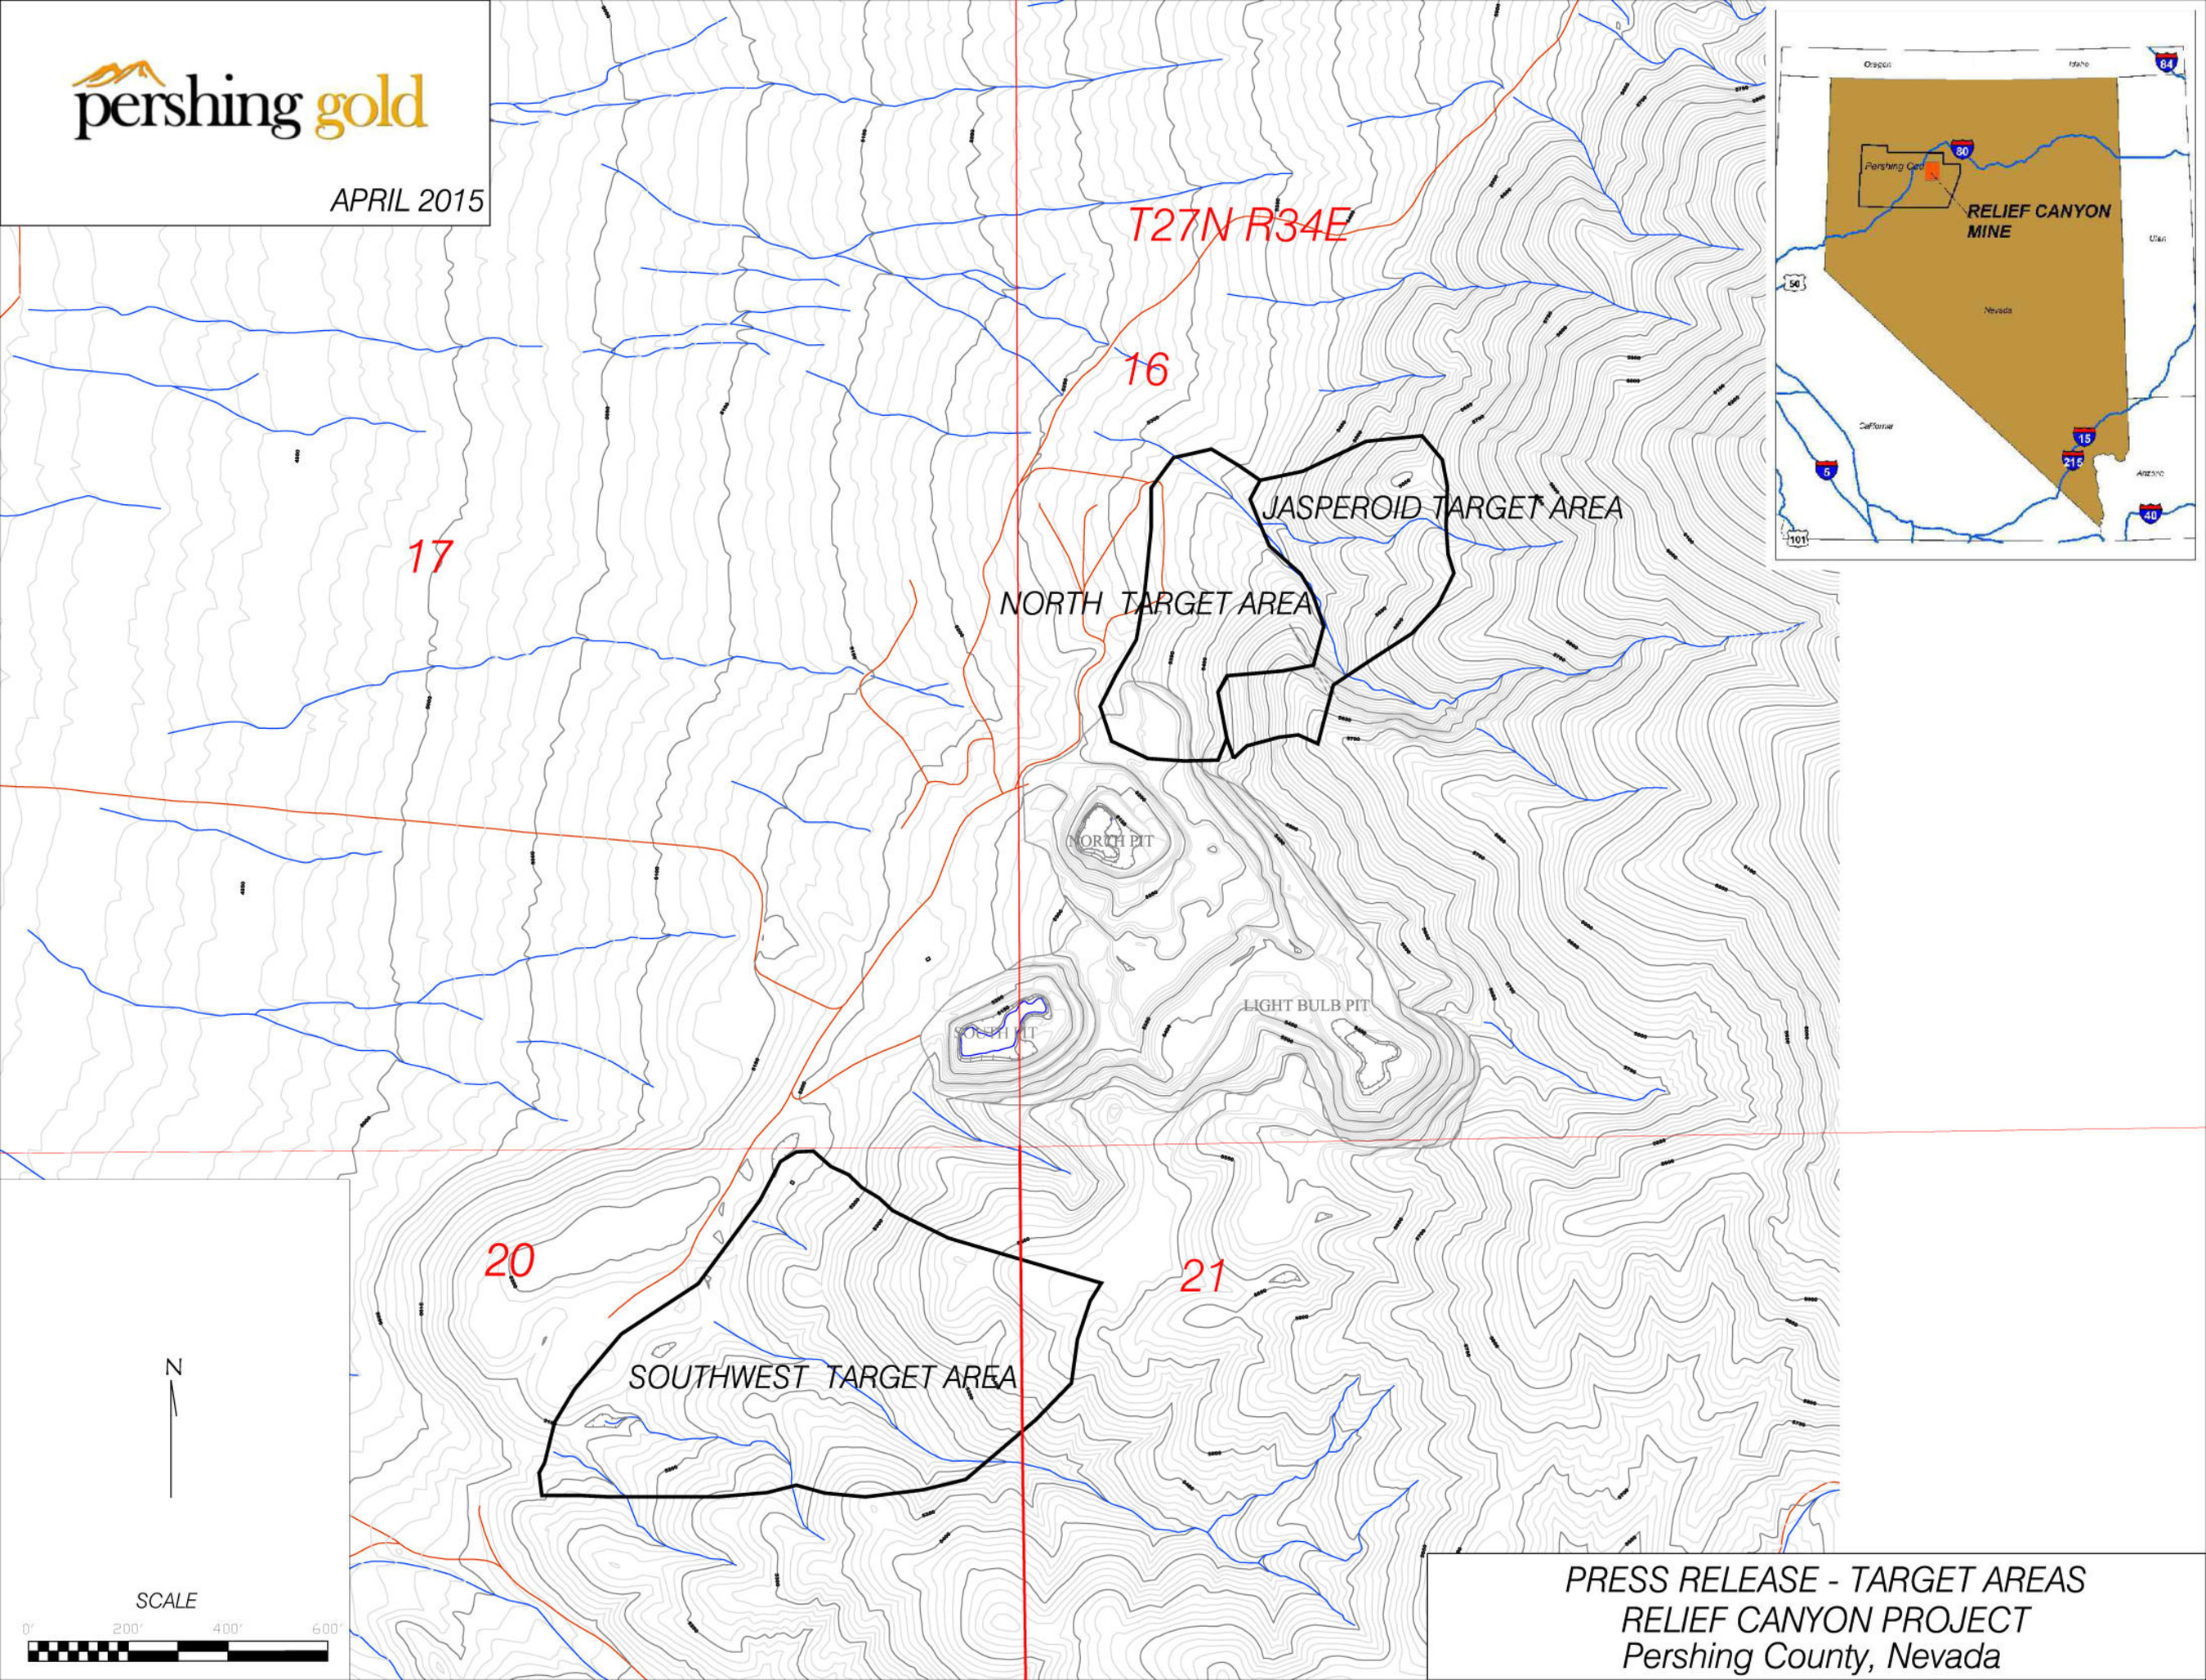 Figure 1, Target Areas, Relief Canyon Project.